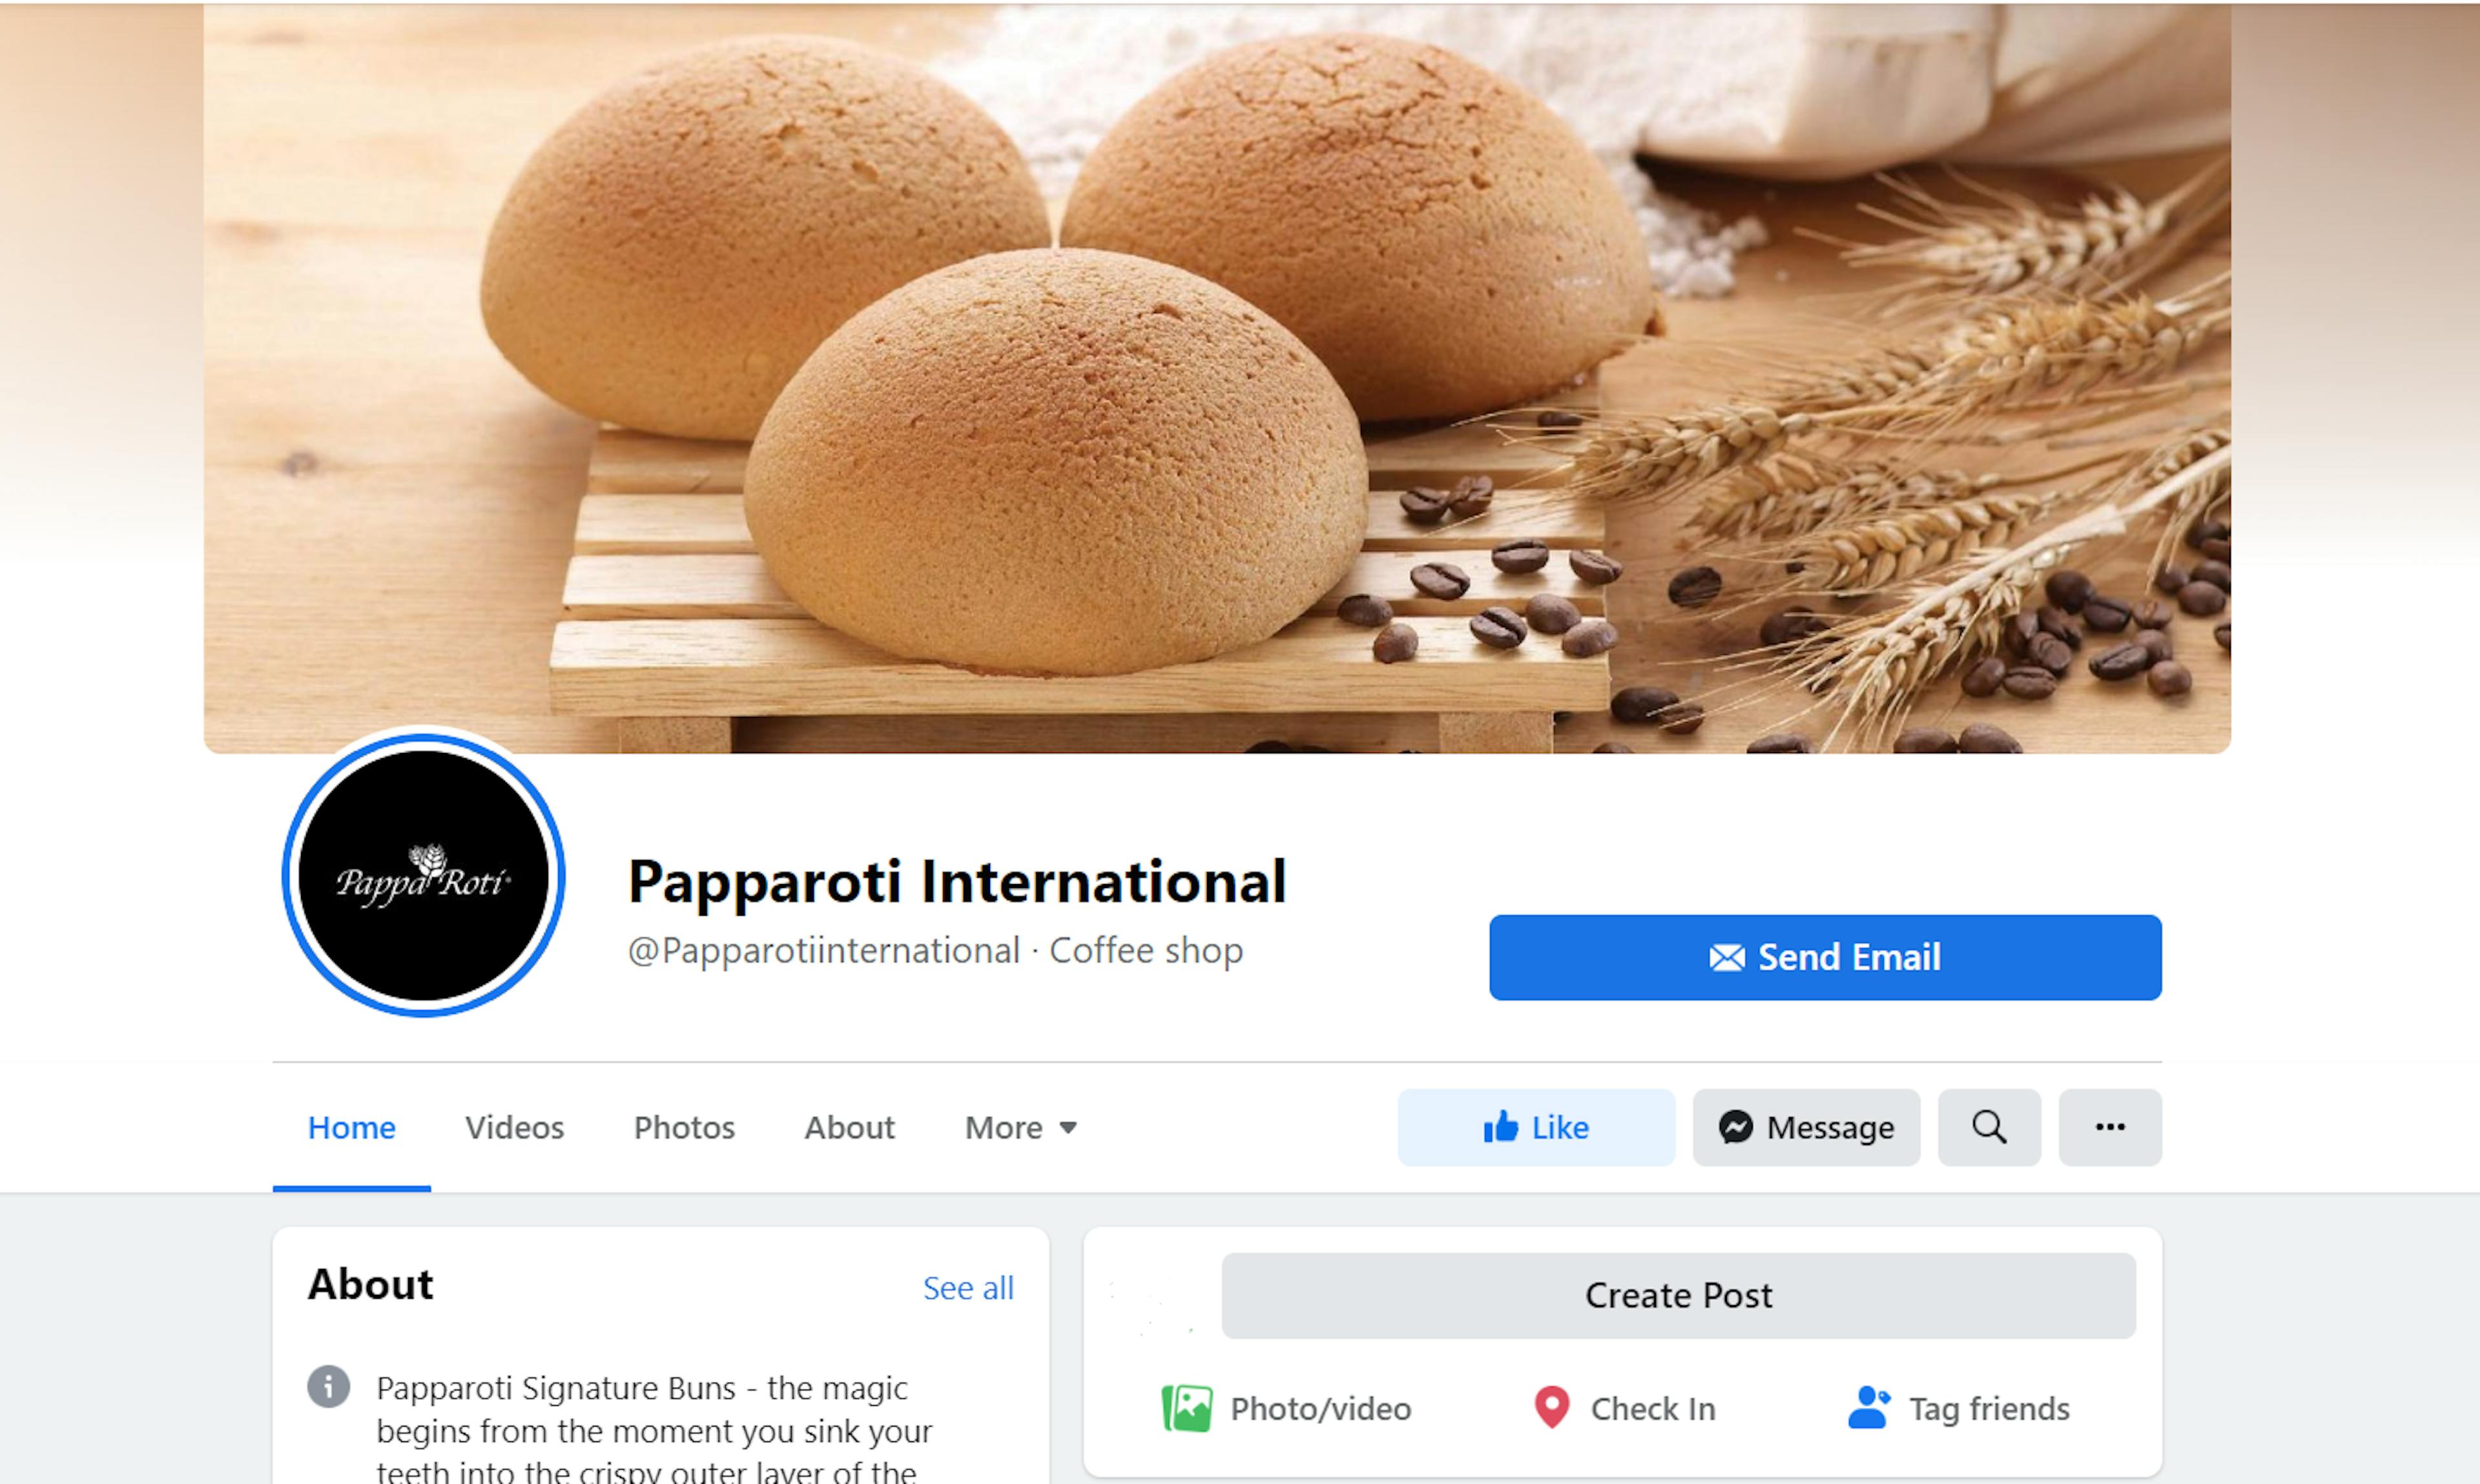 Example of a Business Page on Facebook